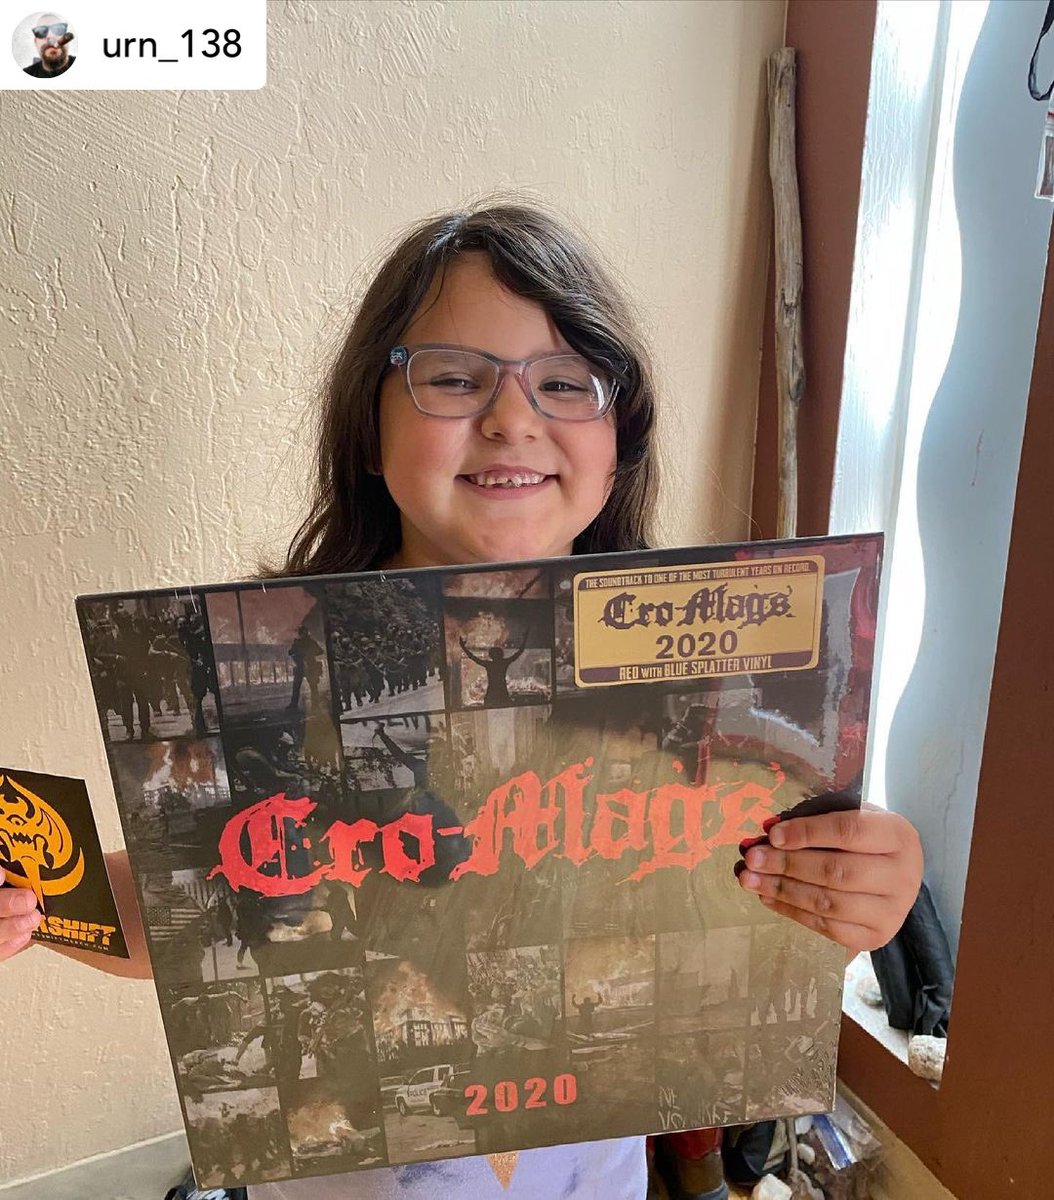 Good for the kids! 

Posted @withregram • @urn_138 New Cro-mags 2020 finally arrived!!! Can’t wait to jam this shit and piss off the neighbors. #cromags2020 #nightshiftmerch #ageofquarantine #harleyflanagan #missiontwoentertainment #stevezingsamhain